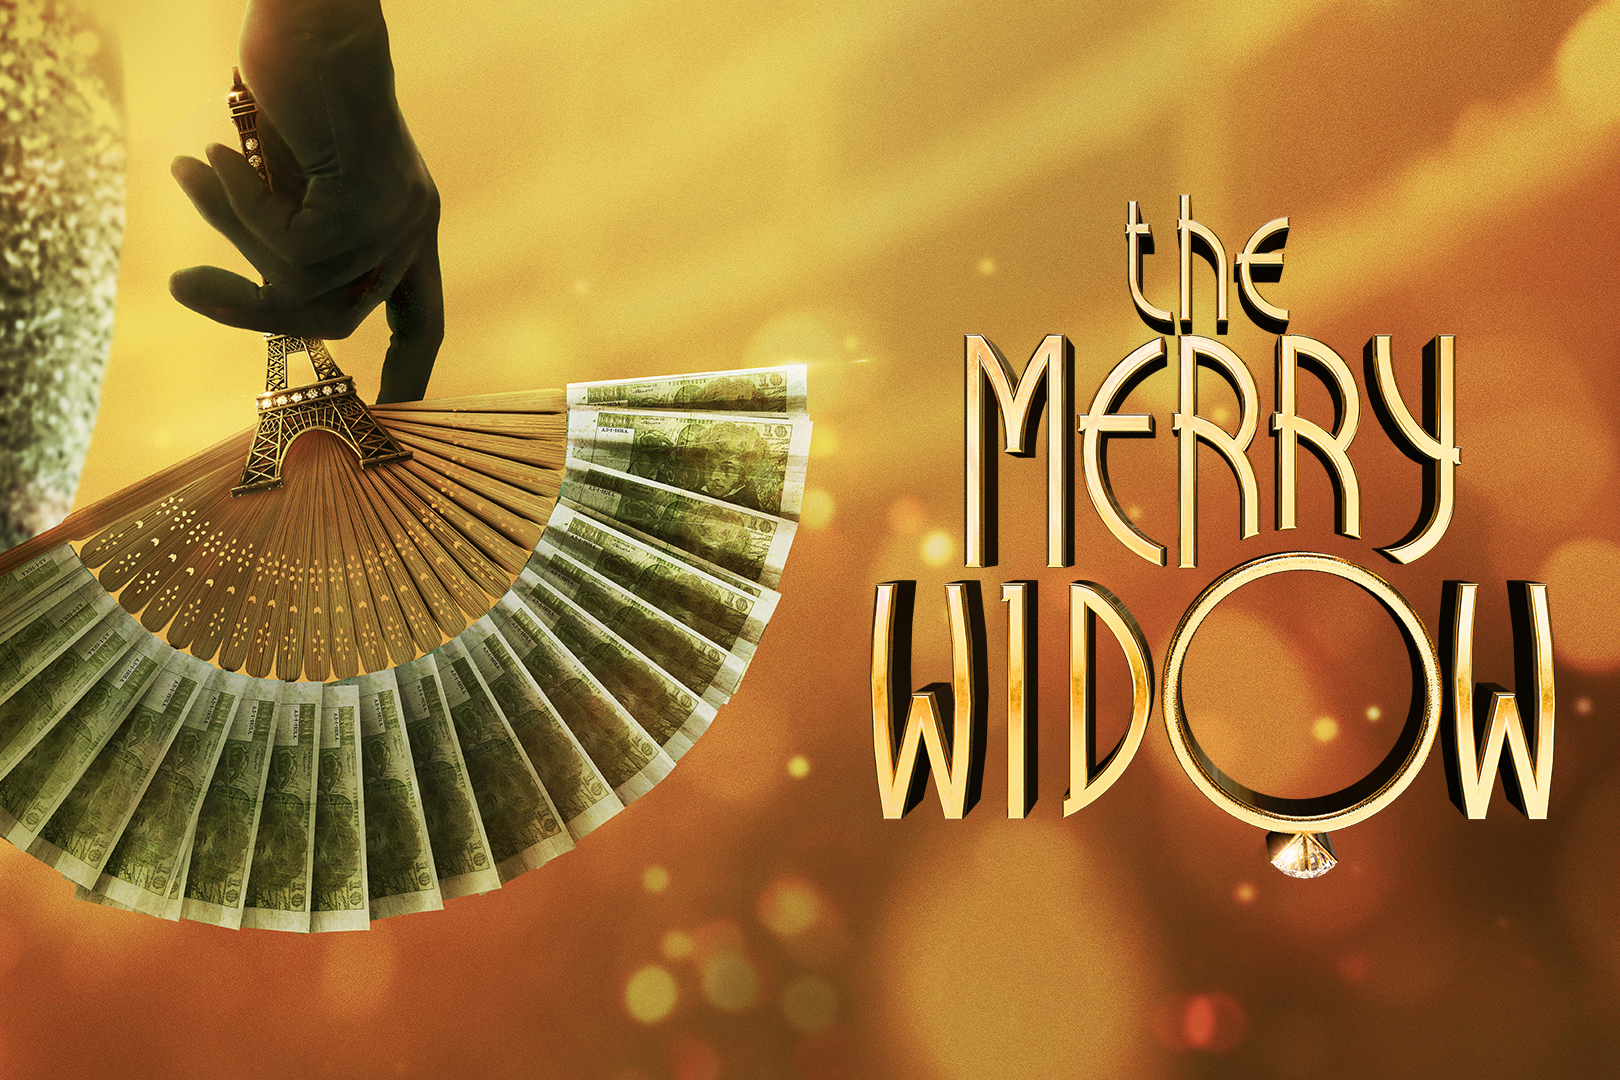 The Merry Widow text against an orange/gold background with a woman's hand holding a fan